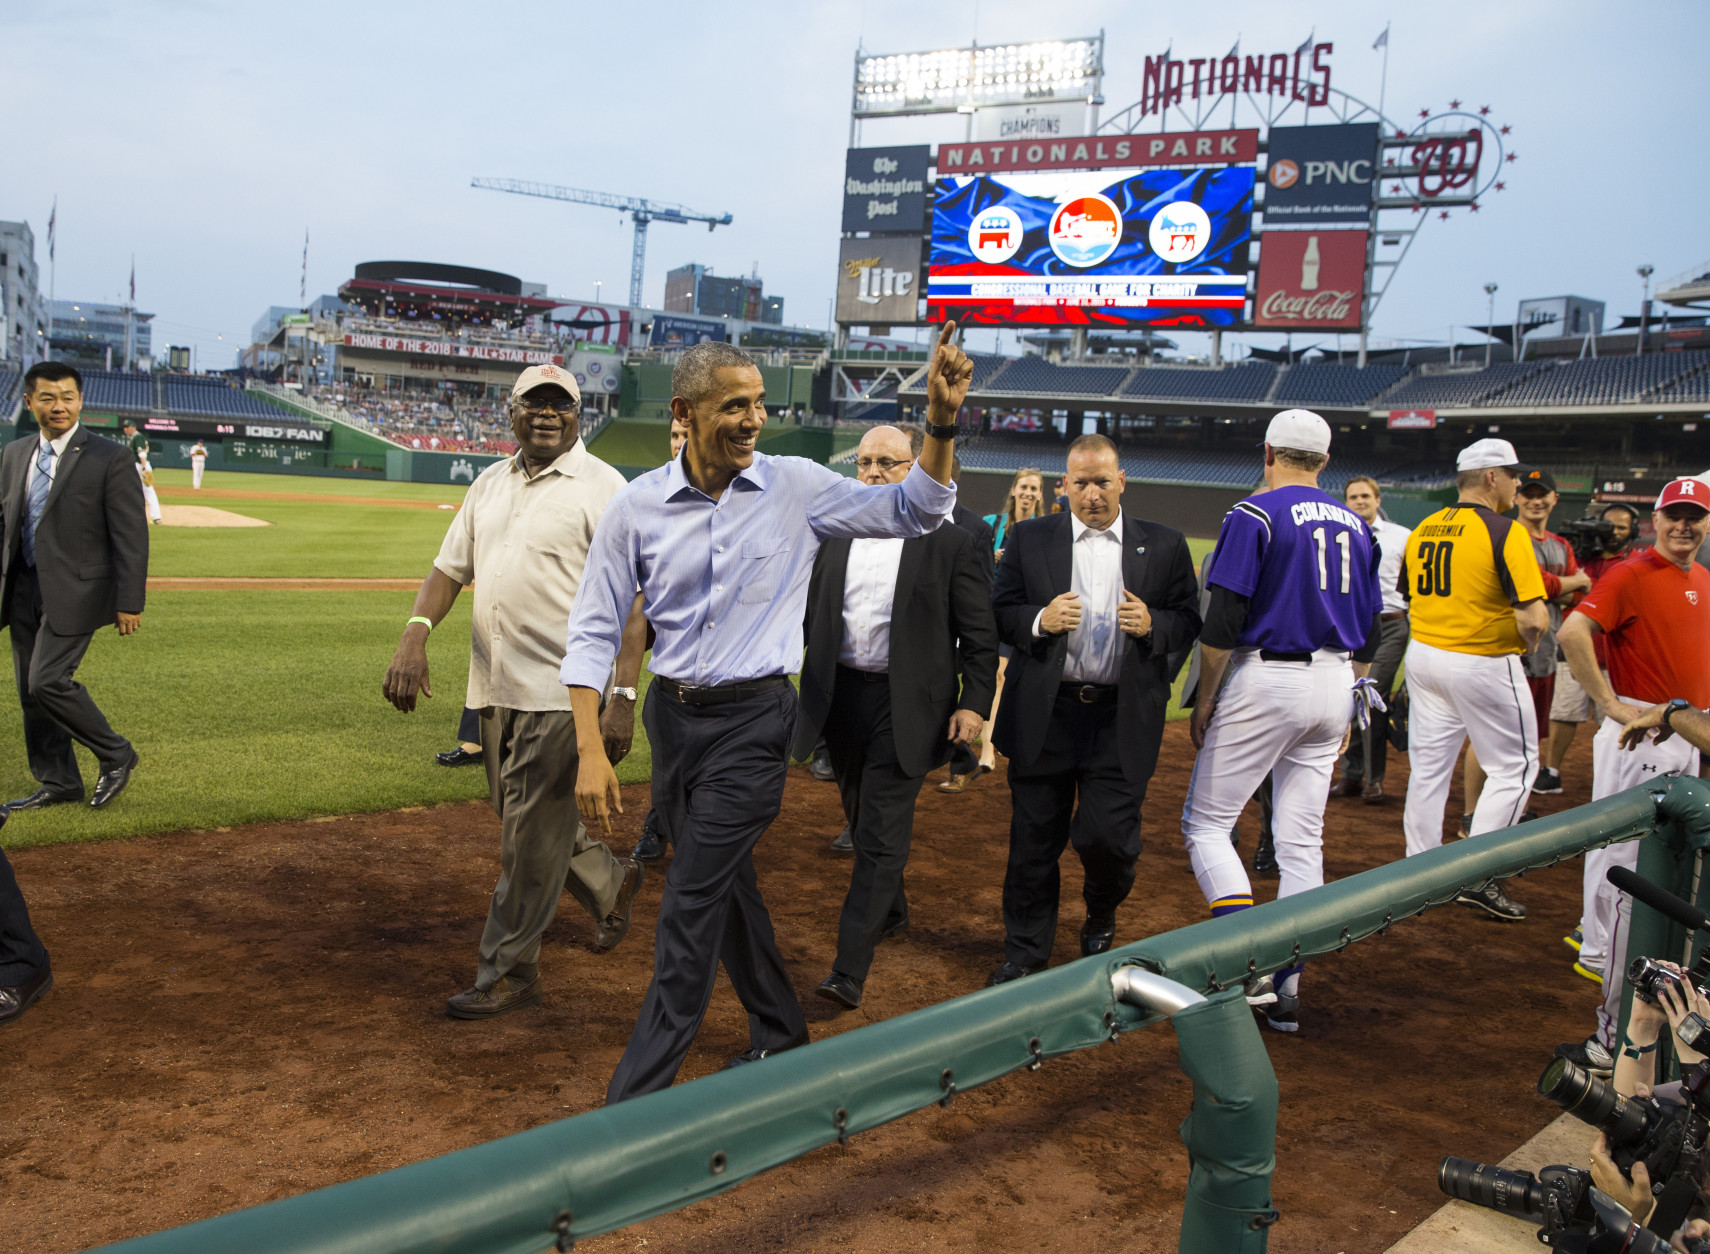 President Barack Obama smiles as he makes a visit to the Congressional baseball game at Nationals Park, on Thursday, June 11, 2015, in Washington (AP Photo/Evan Vucci)